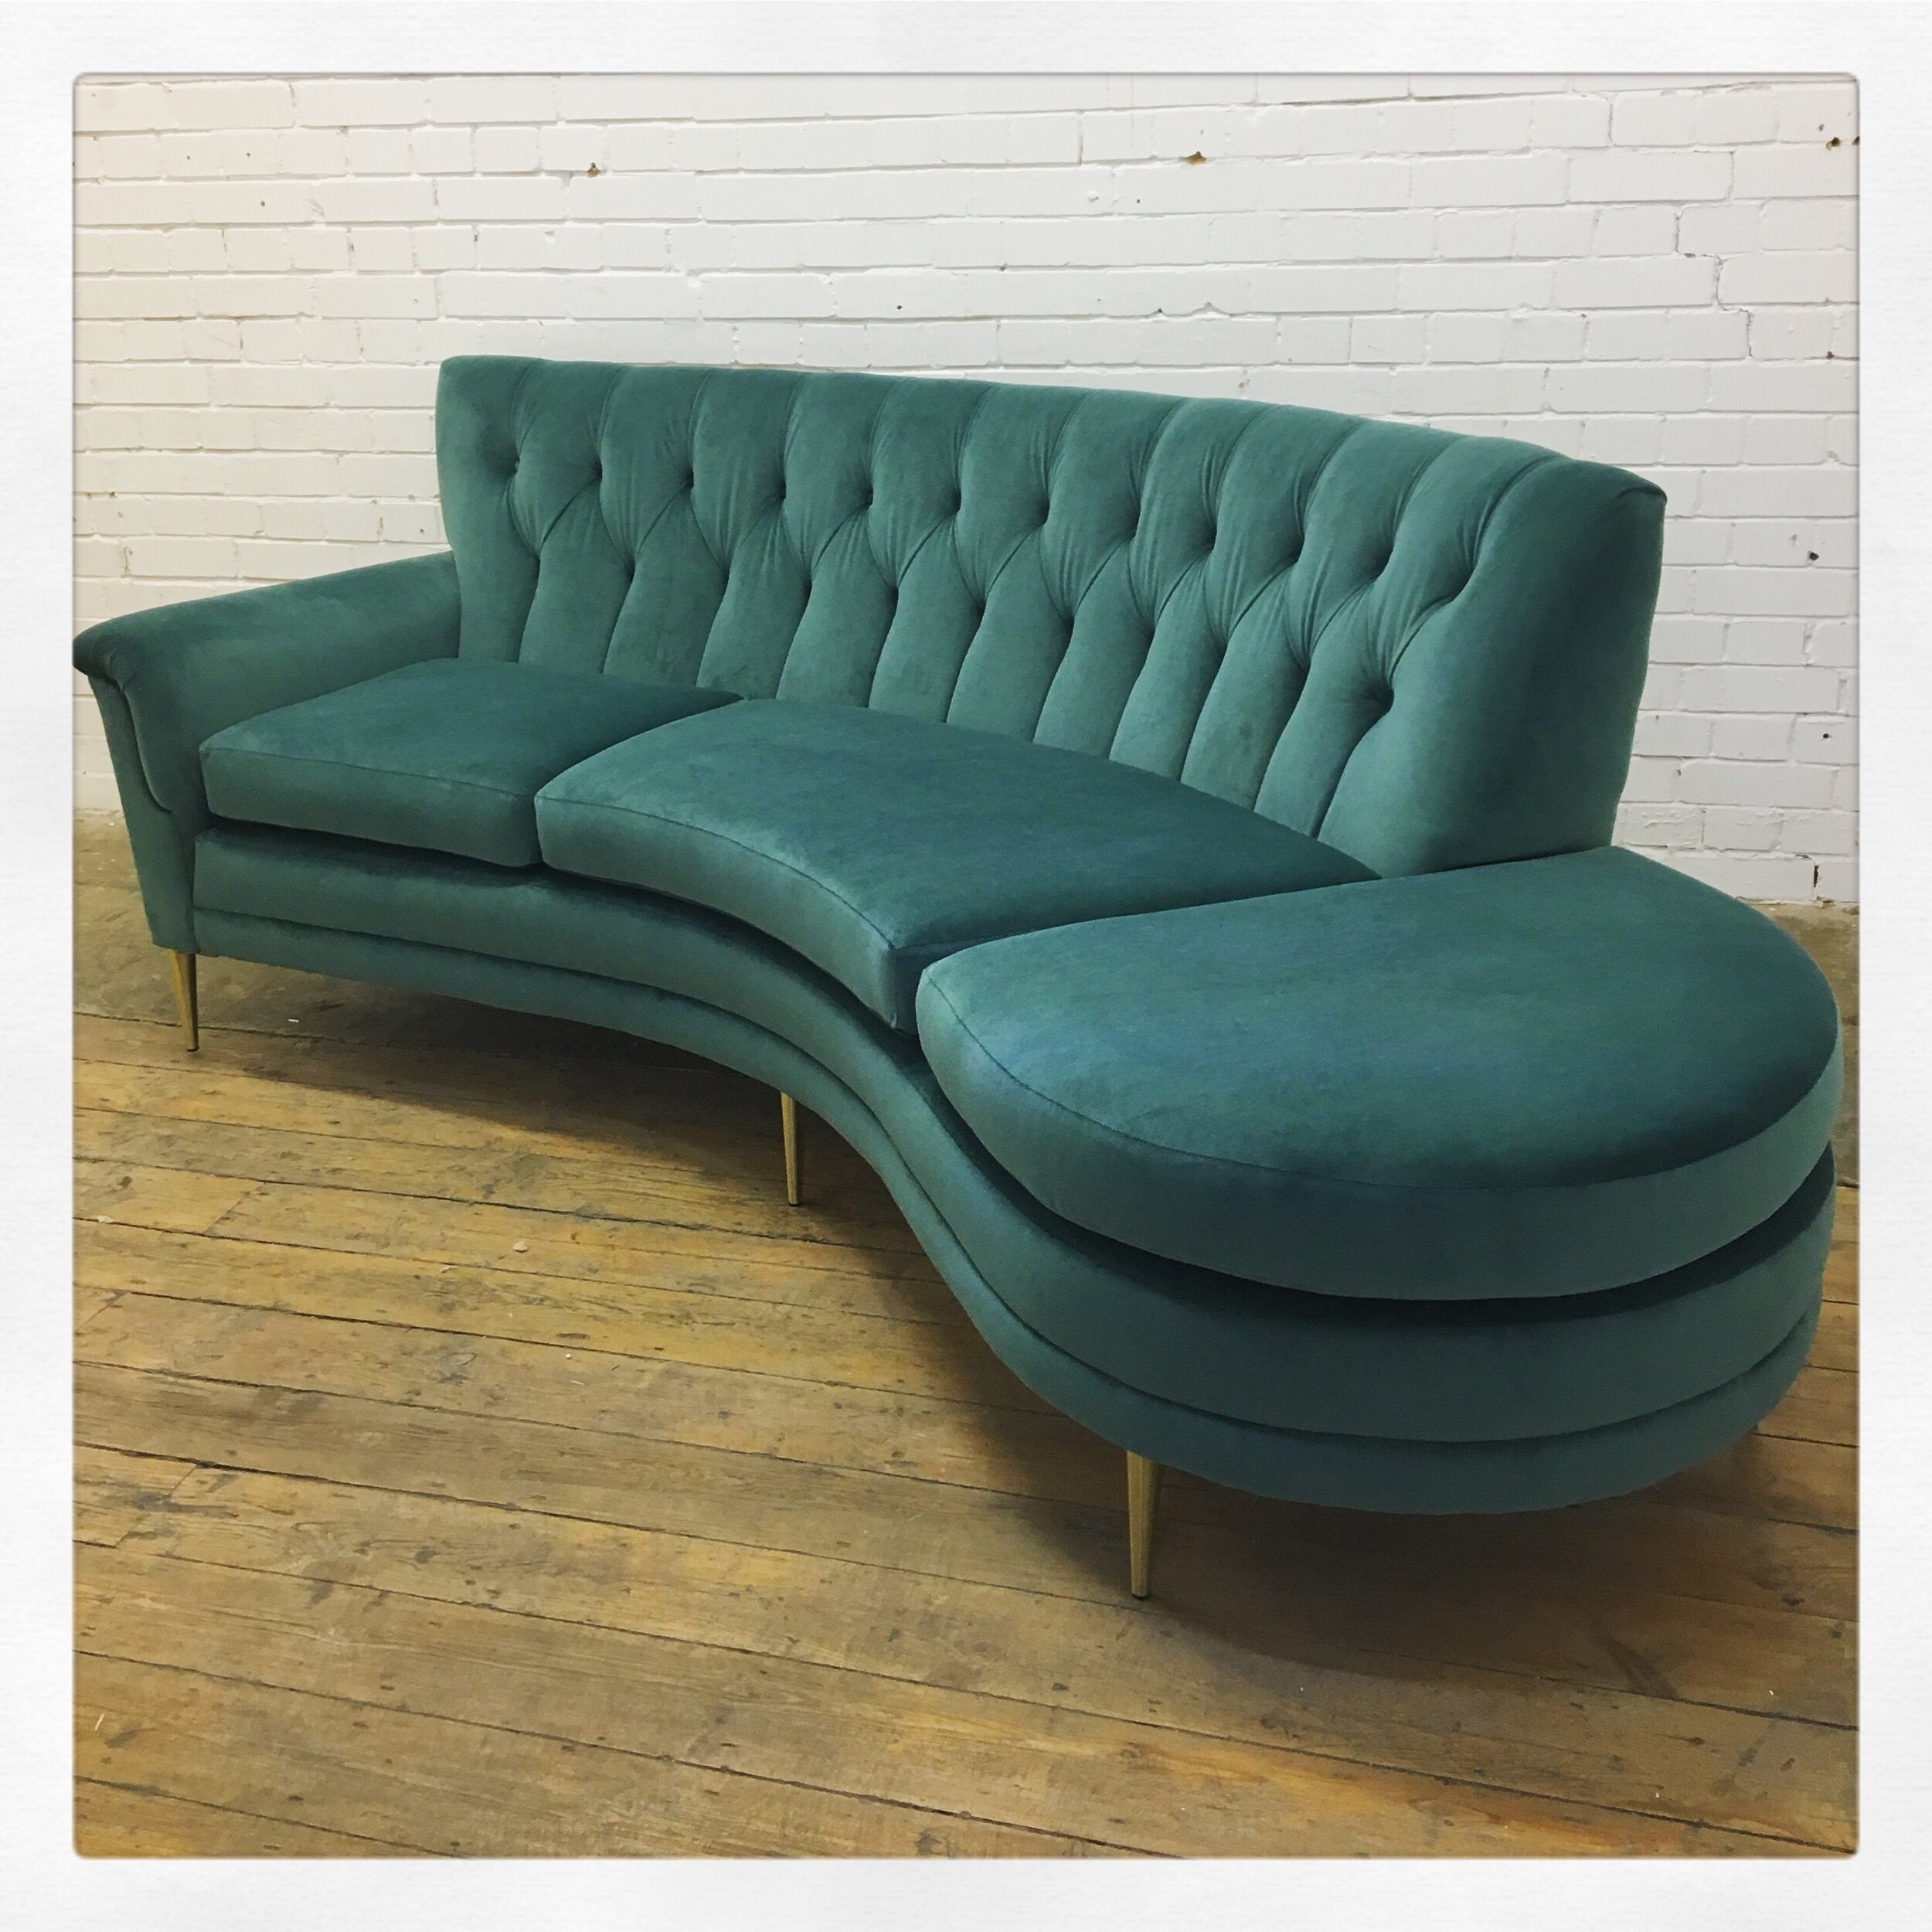 Couch Upholstery in Green Fabric